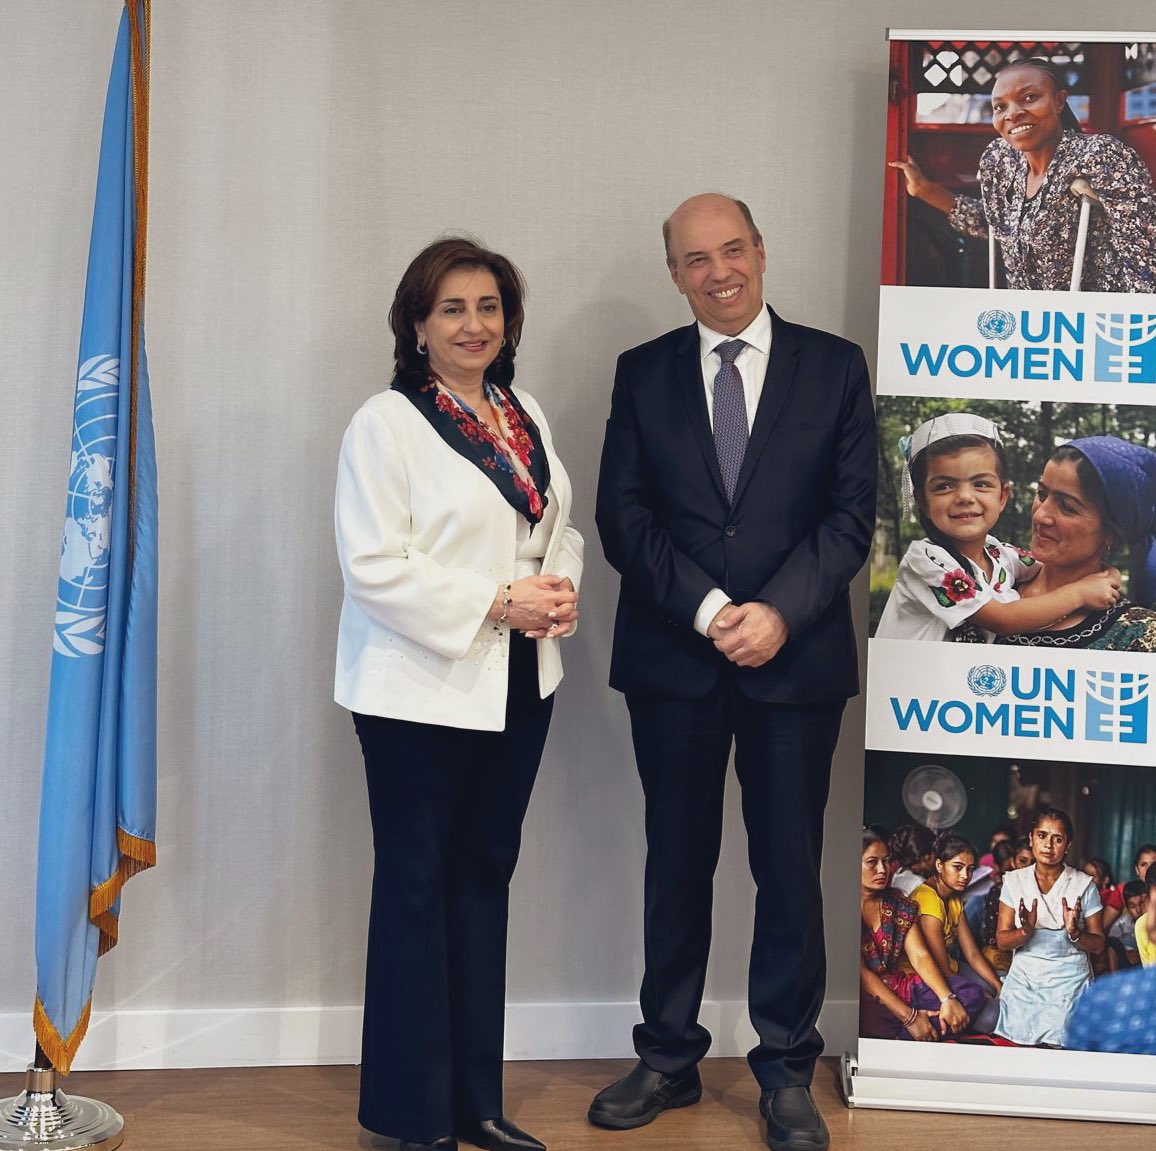 UN Human Rights Council President Omar Zniber met with @unwomenchief Sma Bahous. They underlined the urgent need for gender equality & discussed efforts by @UN_Women & @UN_HRC to ensure women fully participate in & benefit from the human rights to food, health & climate security